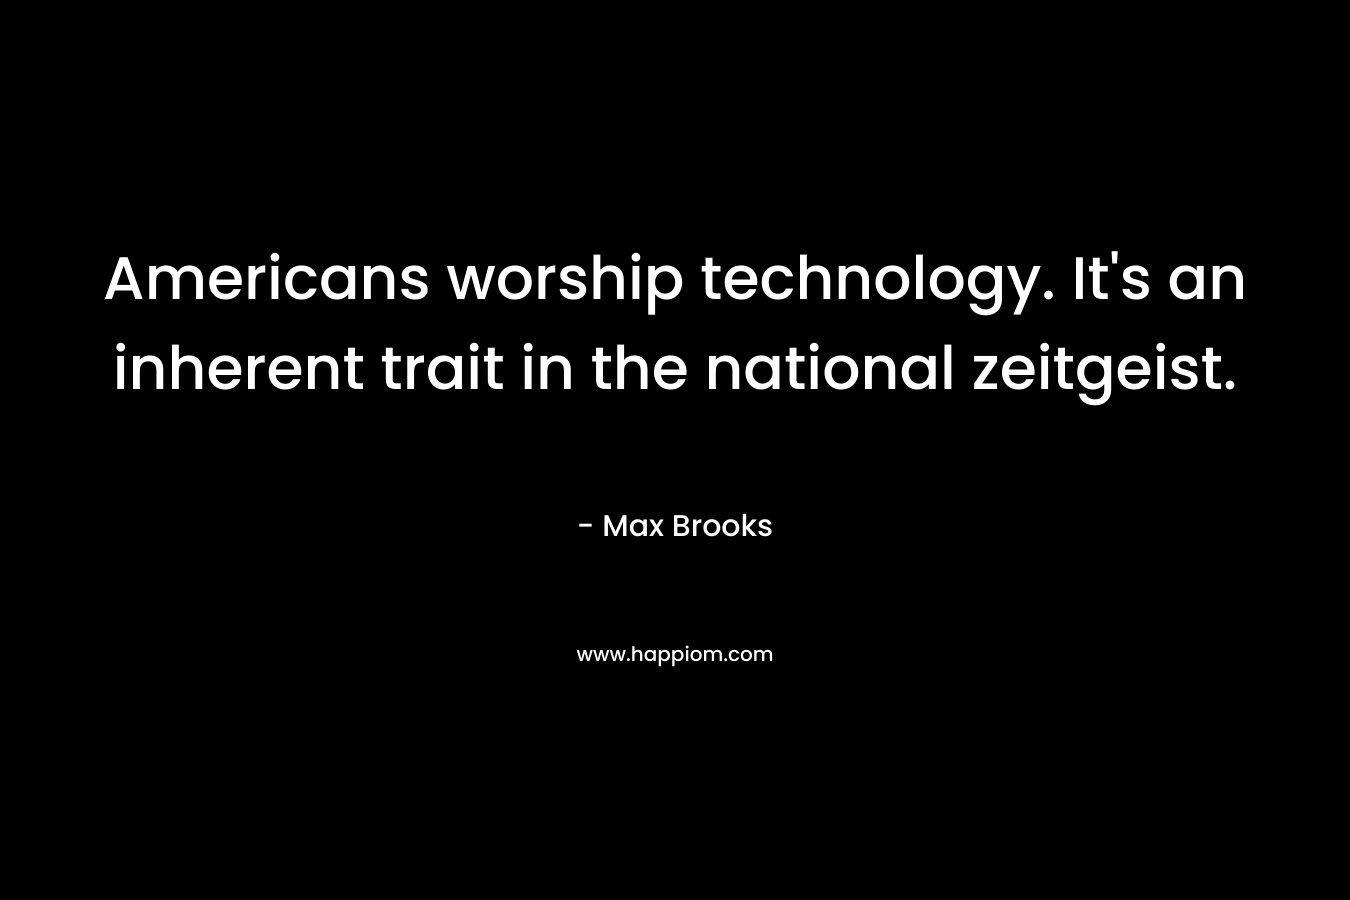 Americans worship technology. It’s an inherent trait in the national zeitgeist. – Max Brooks